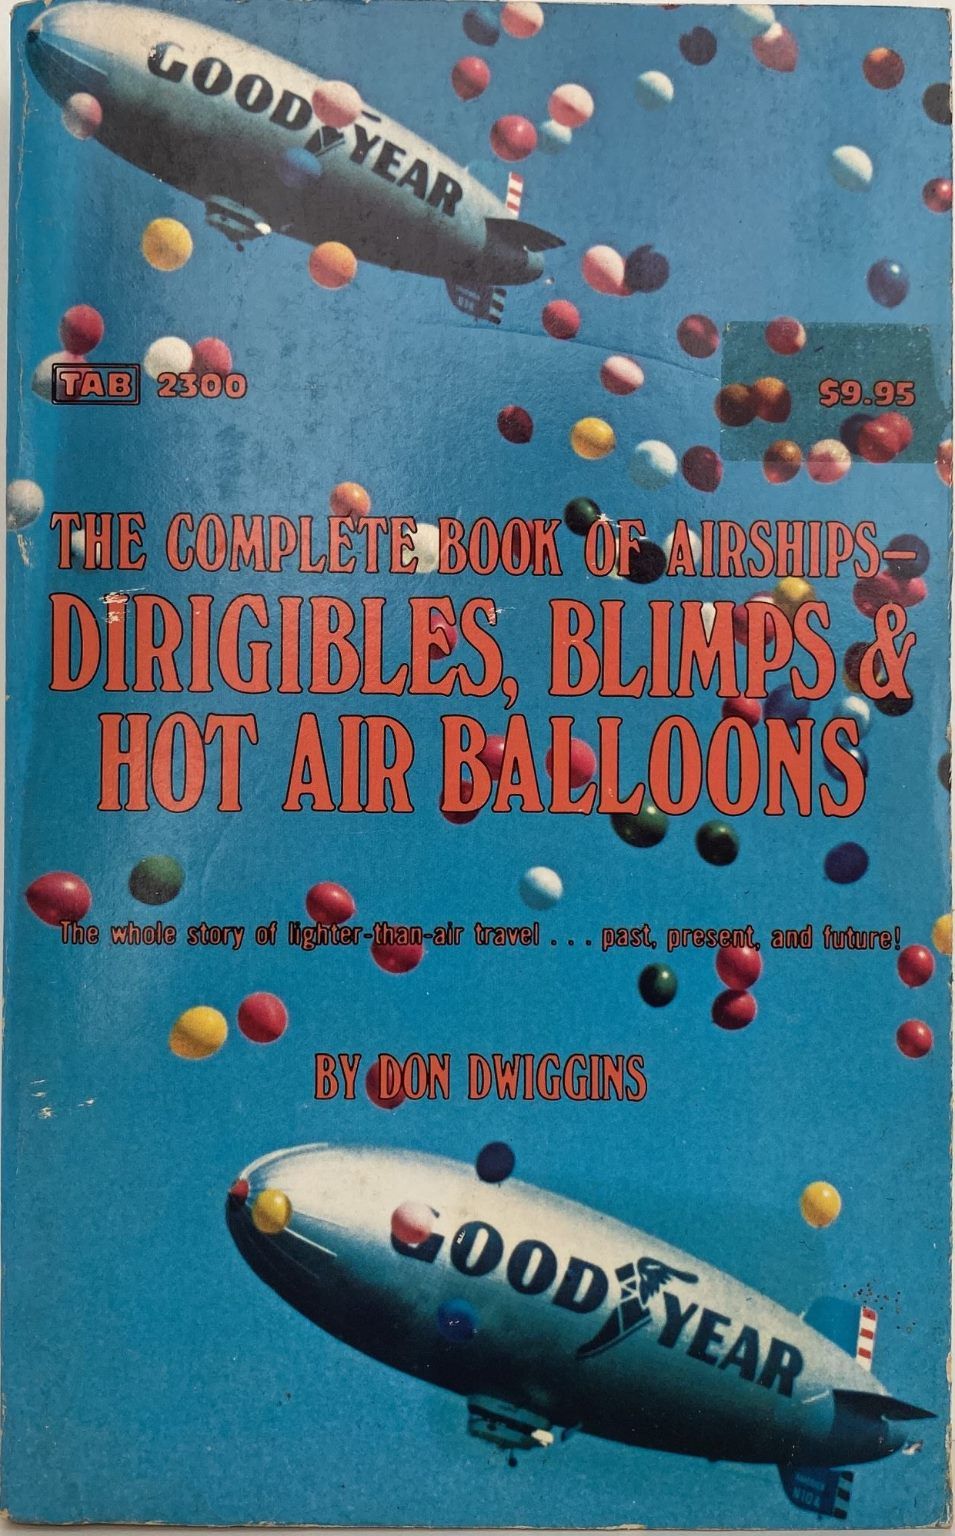 The Complete Book of Airships, Dirigibles, Blimps & Hot Air Balloons